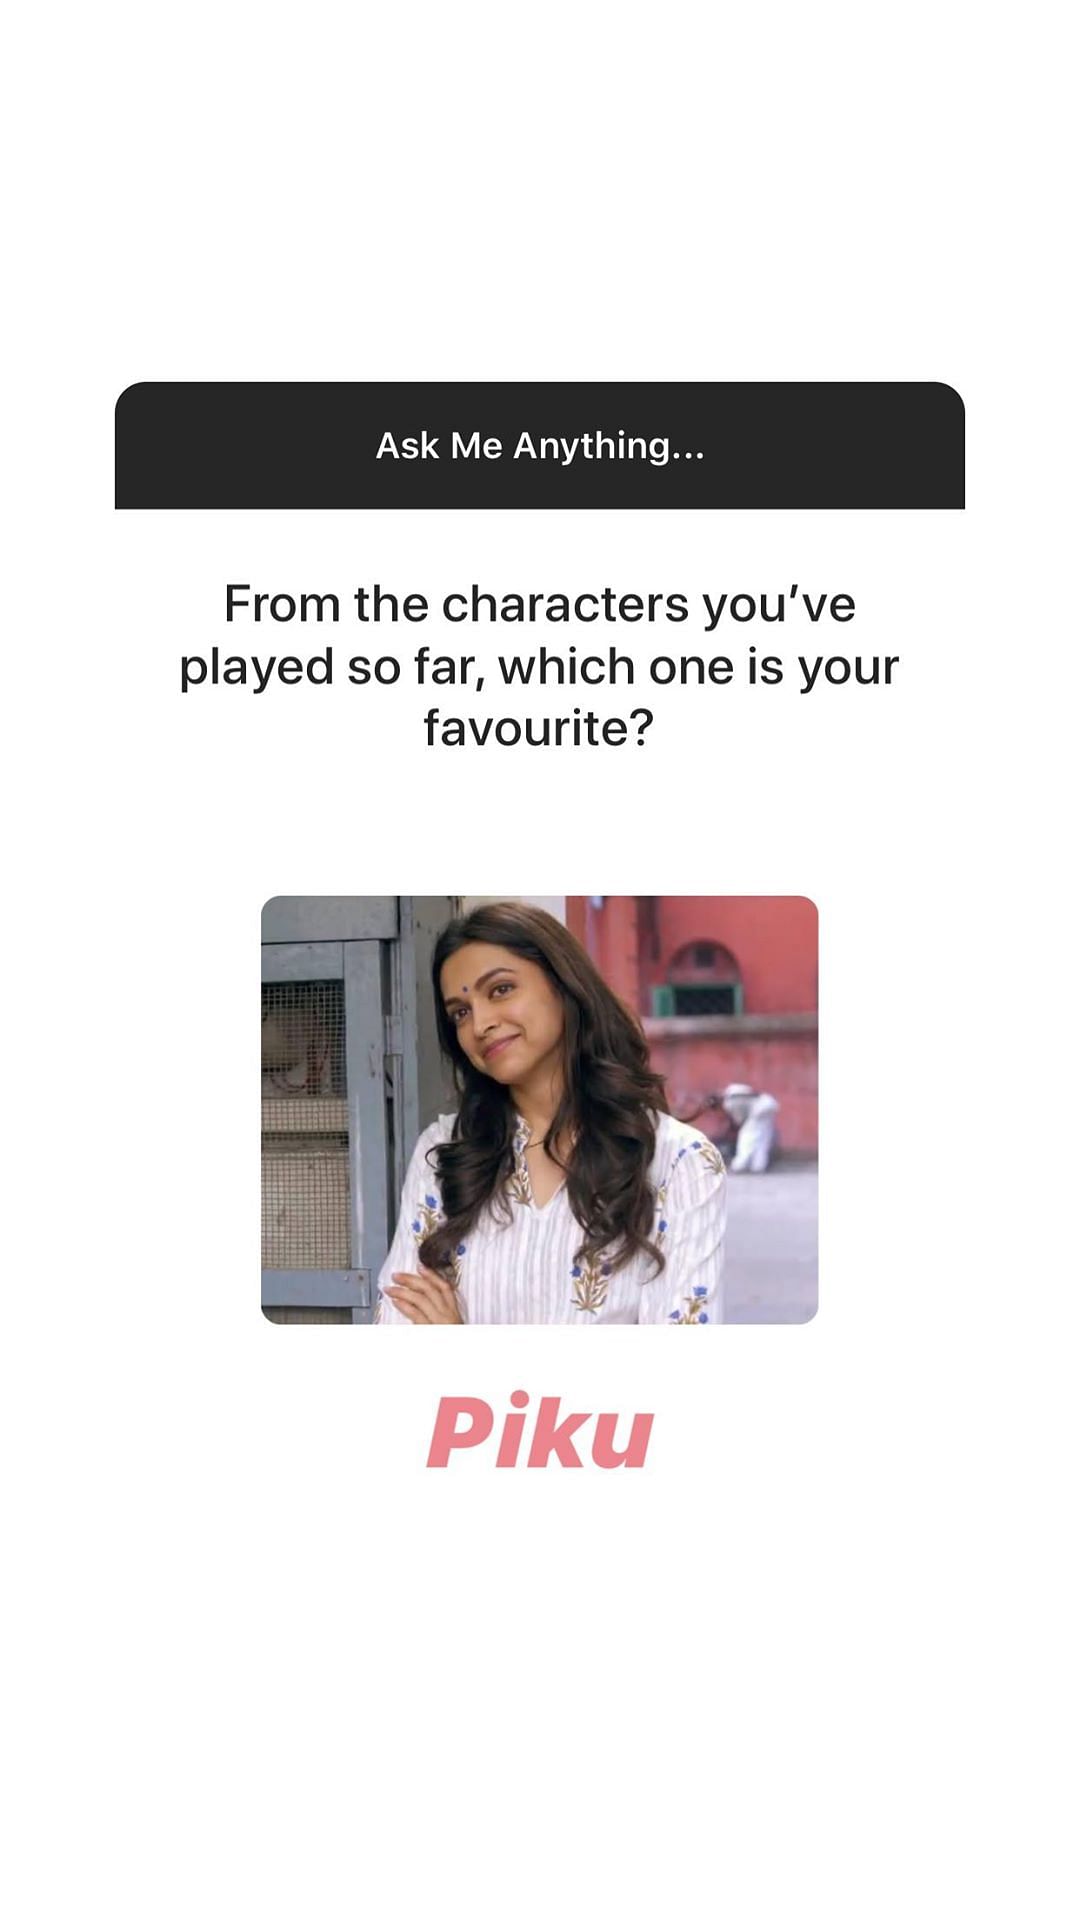 Deepika recently hosted an Ask Me Anything session on Instagram. 